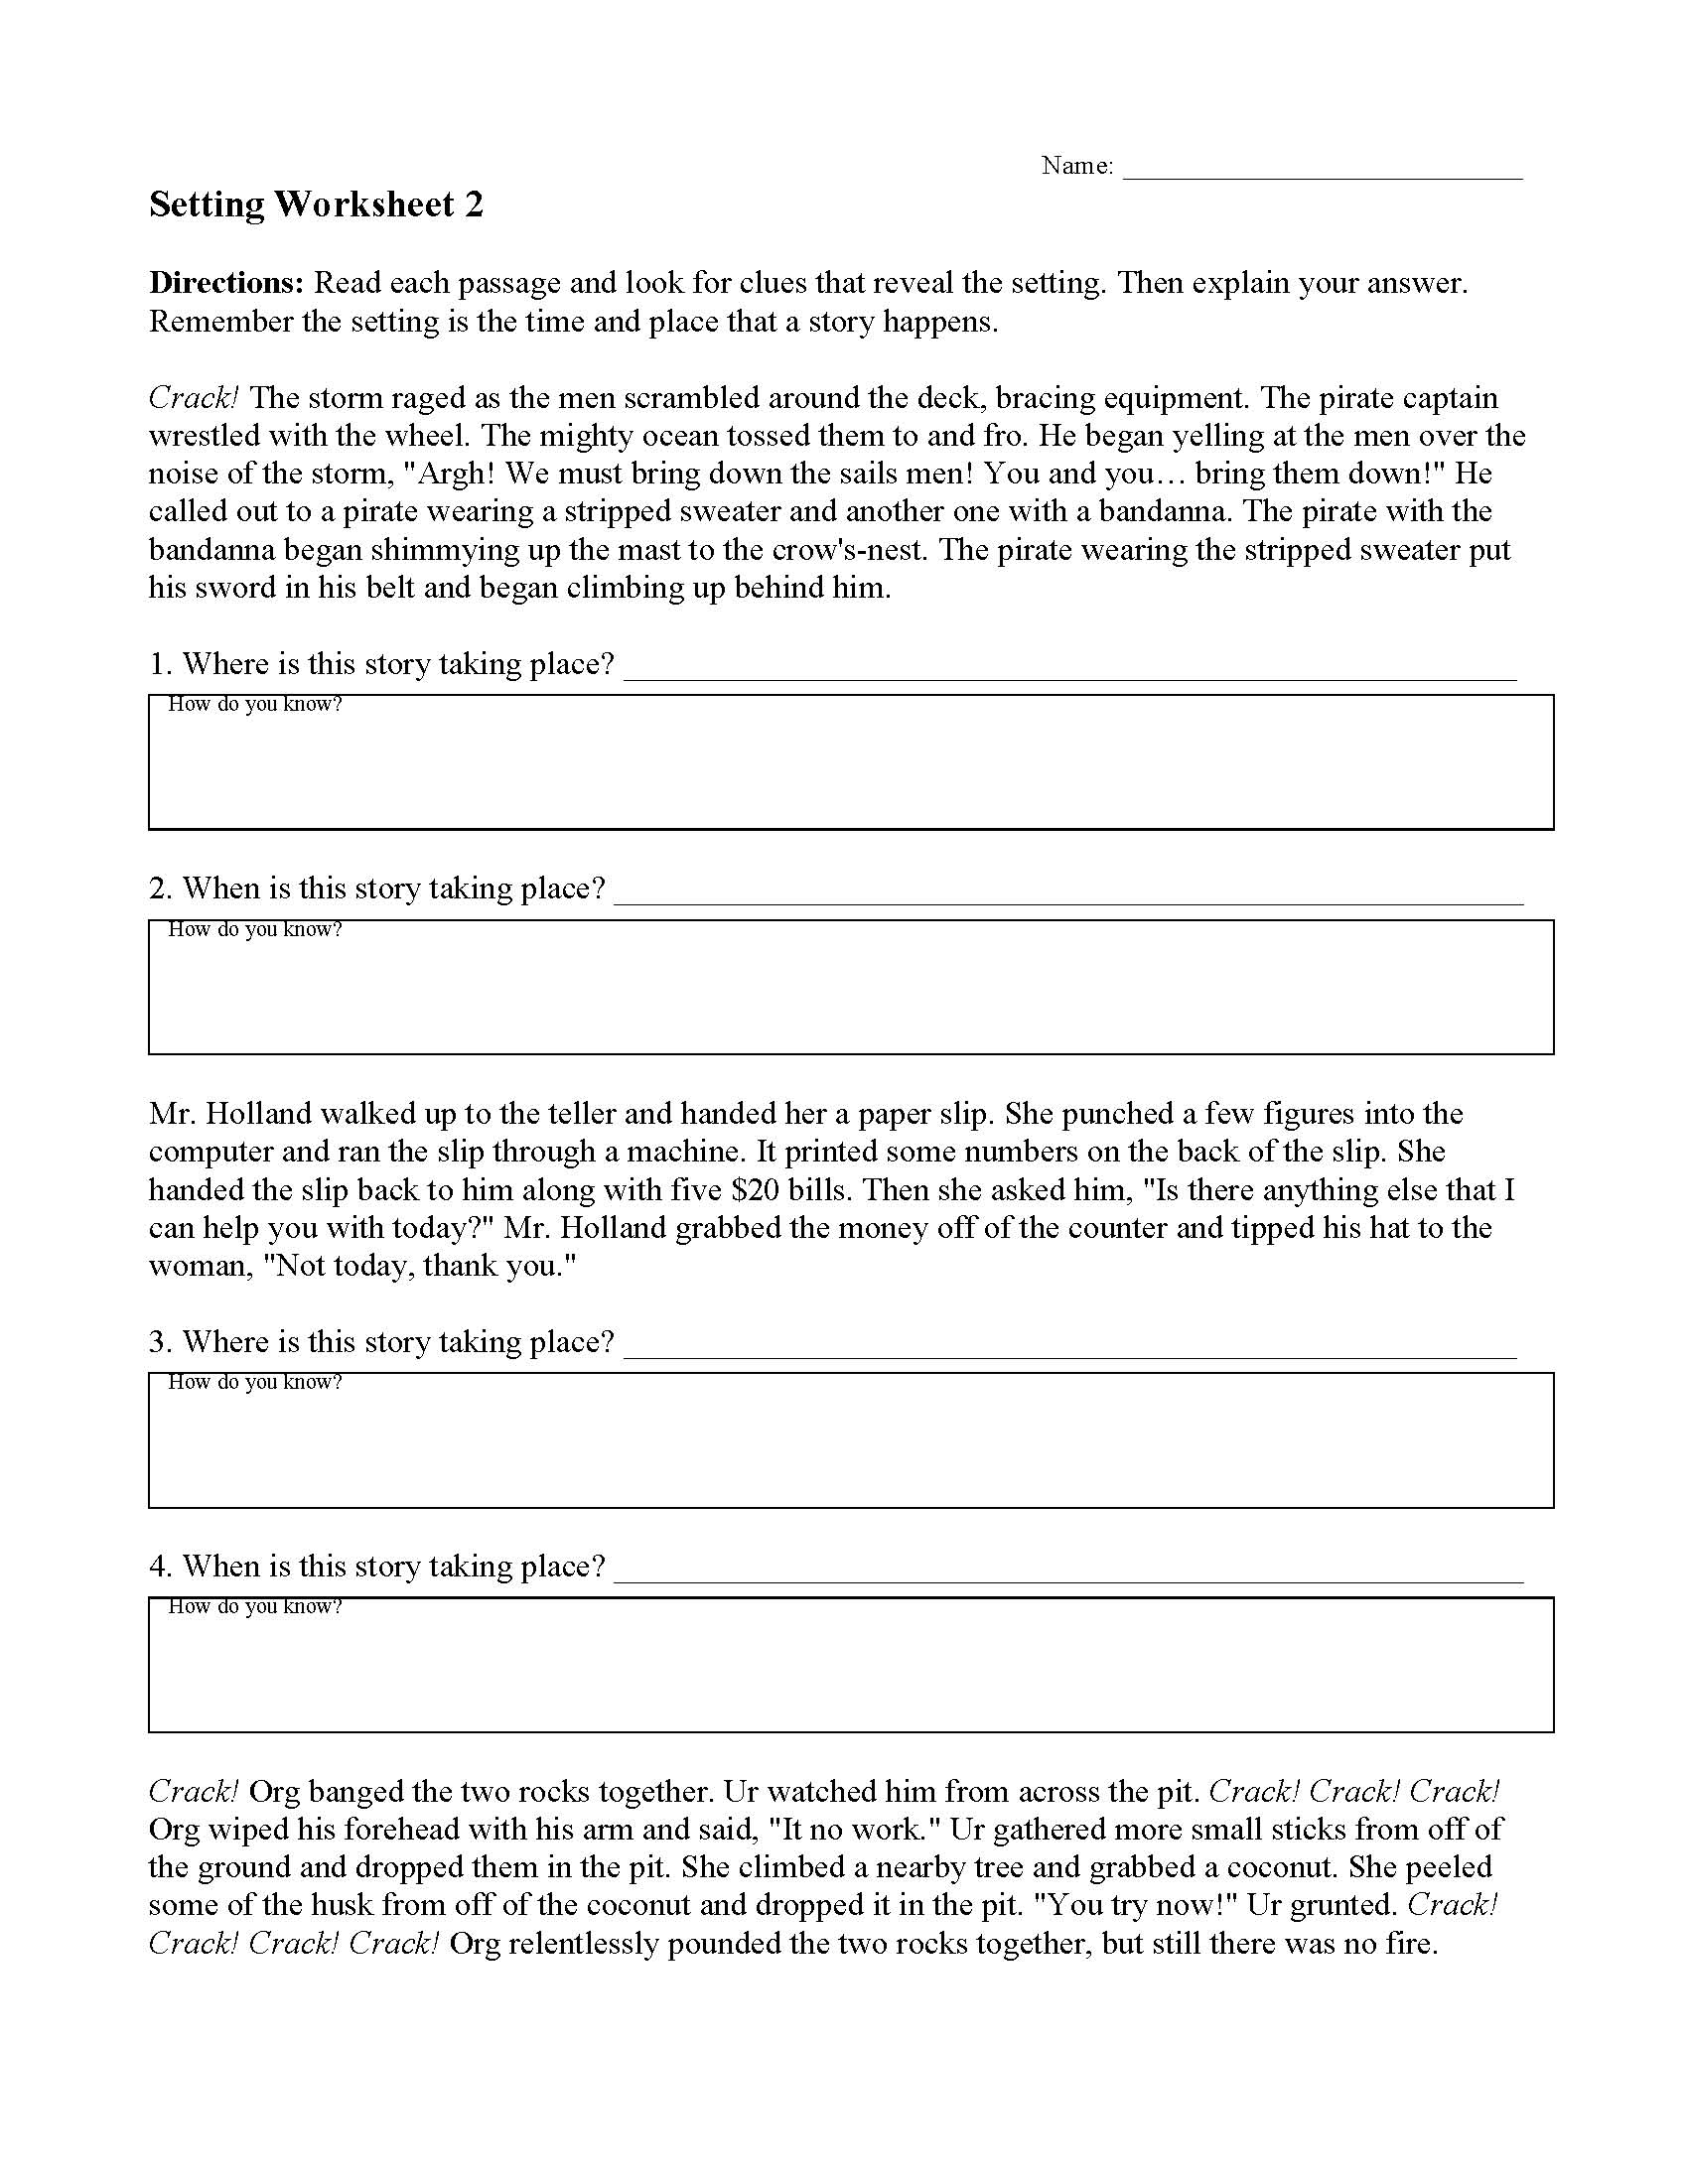 setting-worksheet-2-preview